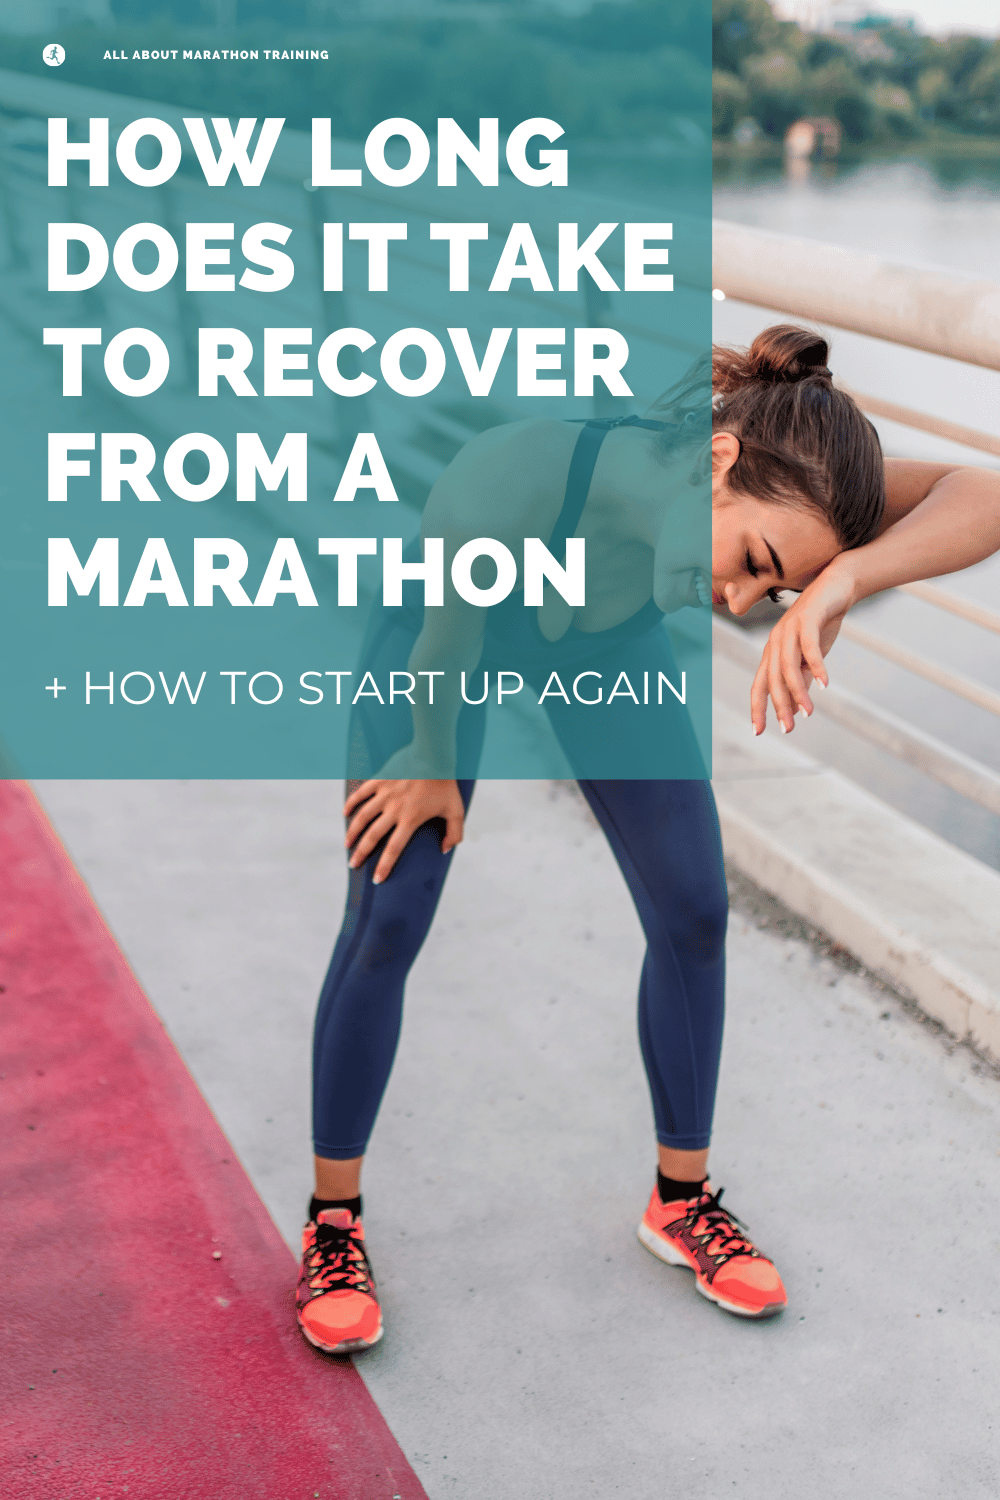 How Long Does It Take to Recover From a Marathon